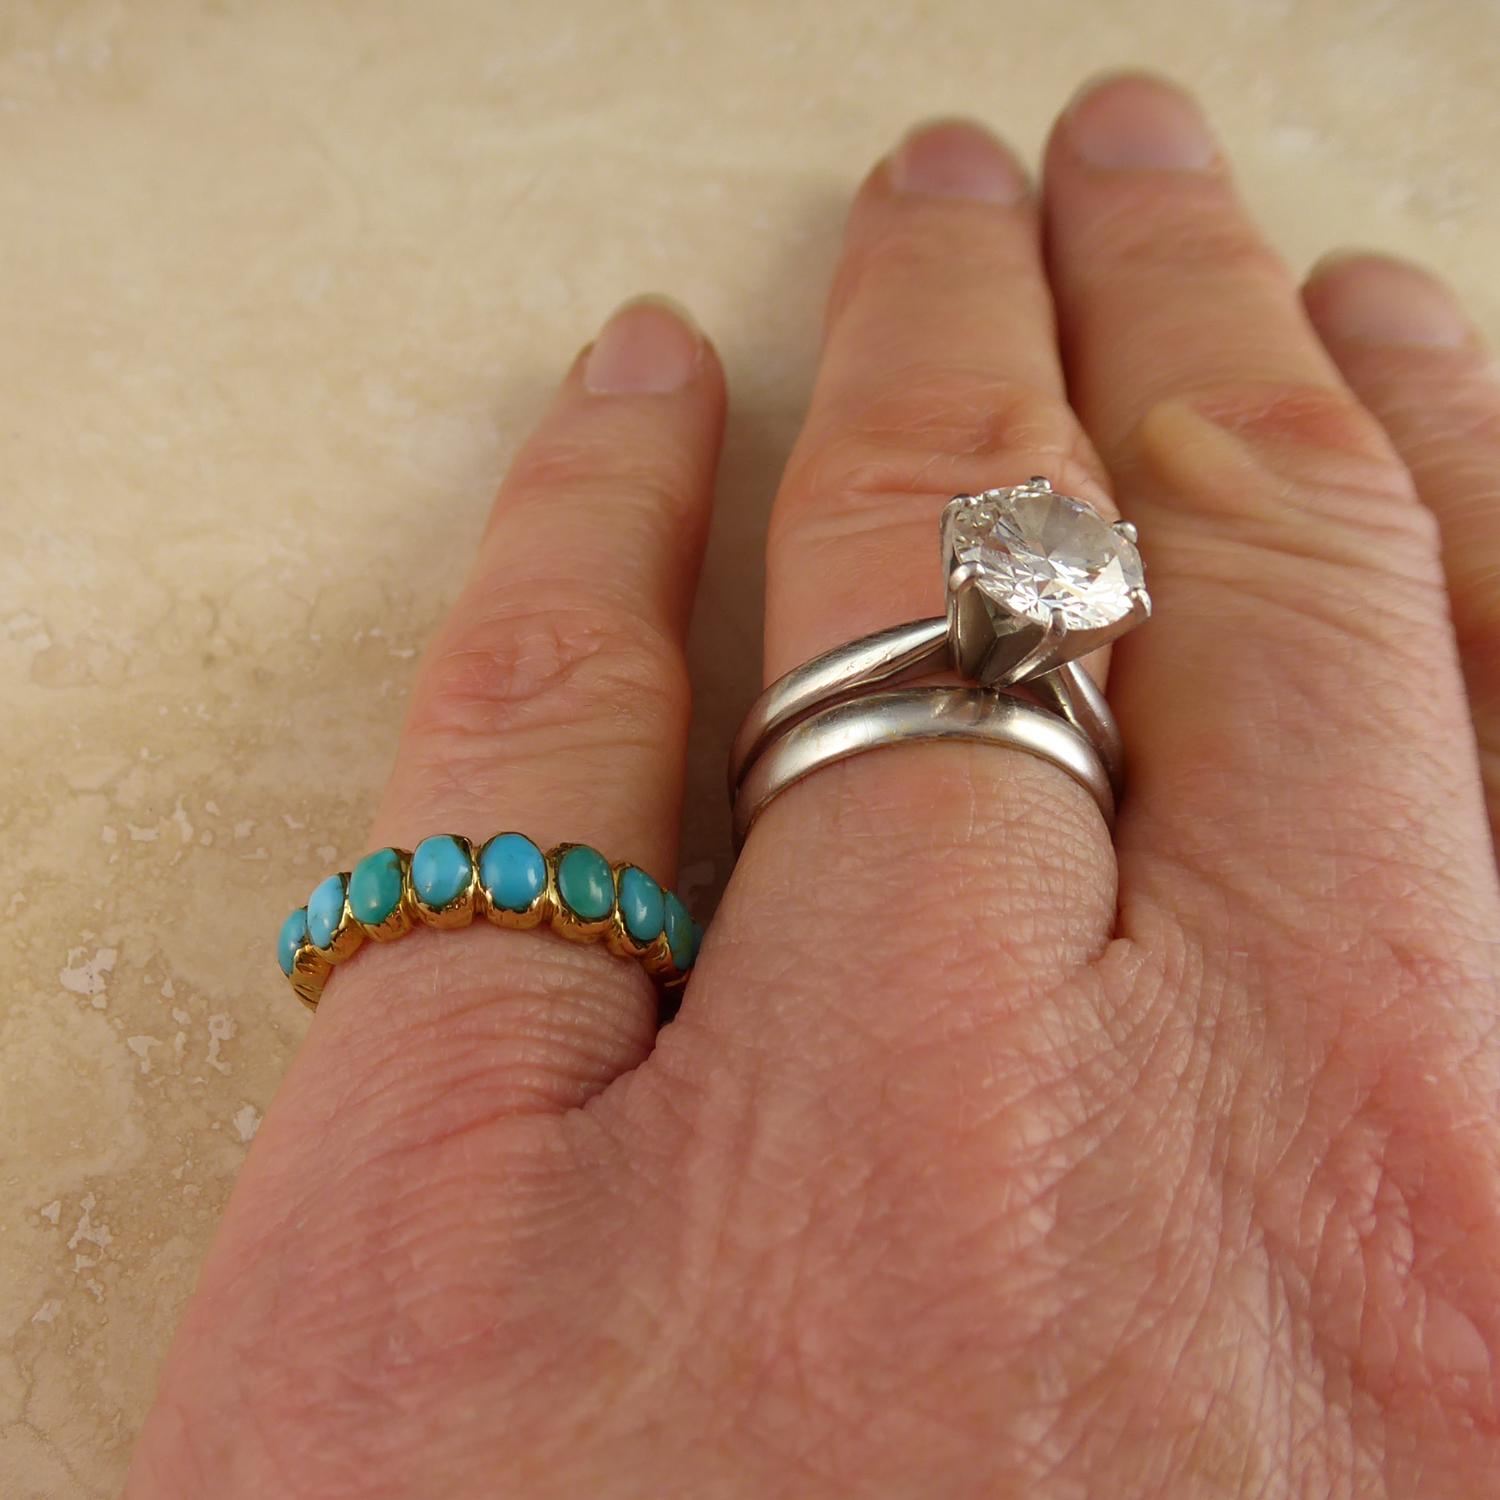 Women's Antique Victorian Turquoise Wedding Ring, Engraved Shoulders, 15 Carat Gold